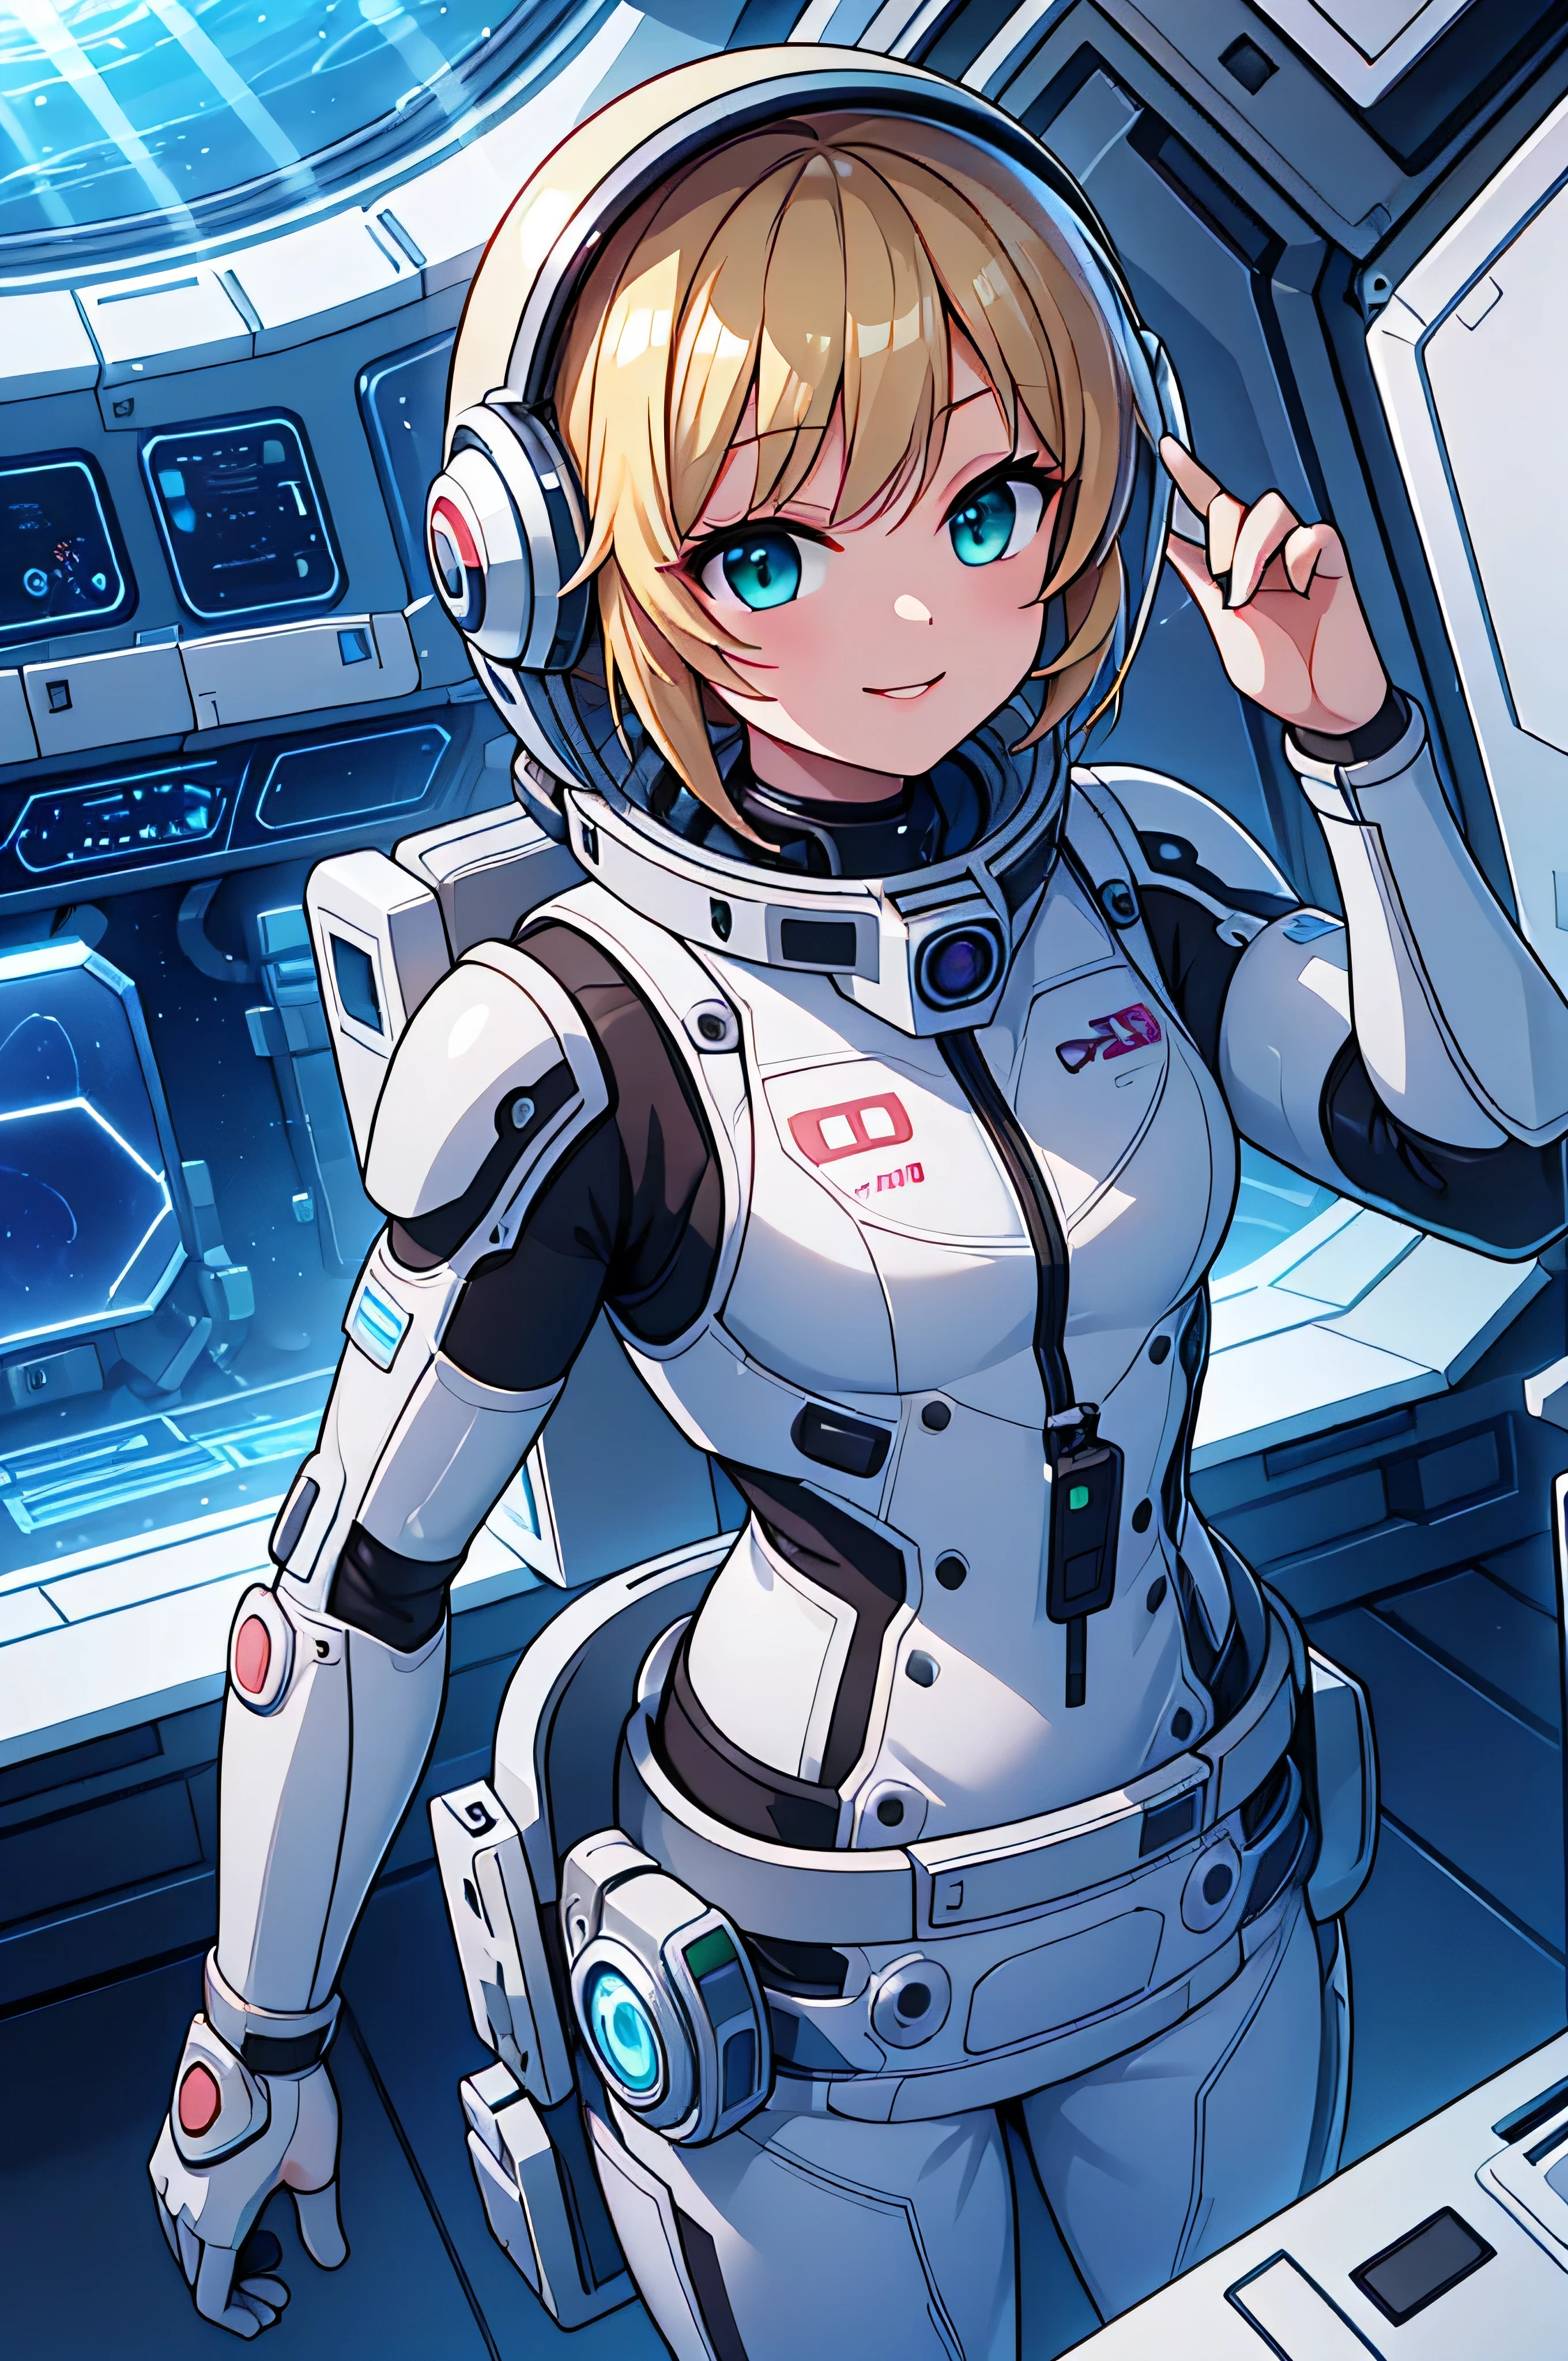 One girl, blondes_hair, One person,(Space Helmet):6, green_eye, Lookwg_w_Audience,Green color_White_futuristic_divwg_suit, Realistic, chest, short_hair, lips, Moderate_chest, cyborg_Enhancements, expensive_technology_armor, underwwer, coral_Reef, tropical_fish, sunlight_light, futuristic_brewhwg_apparwus,Smile